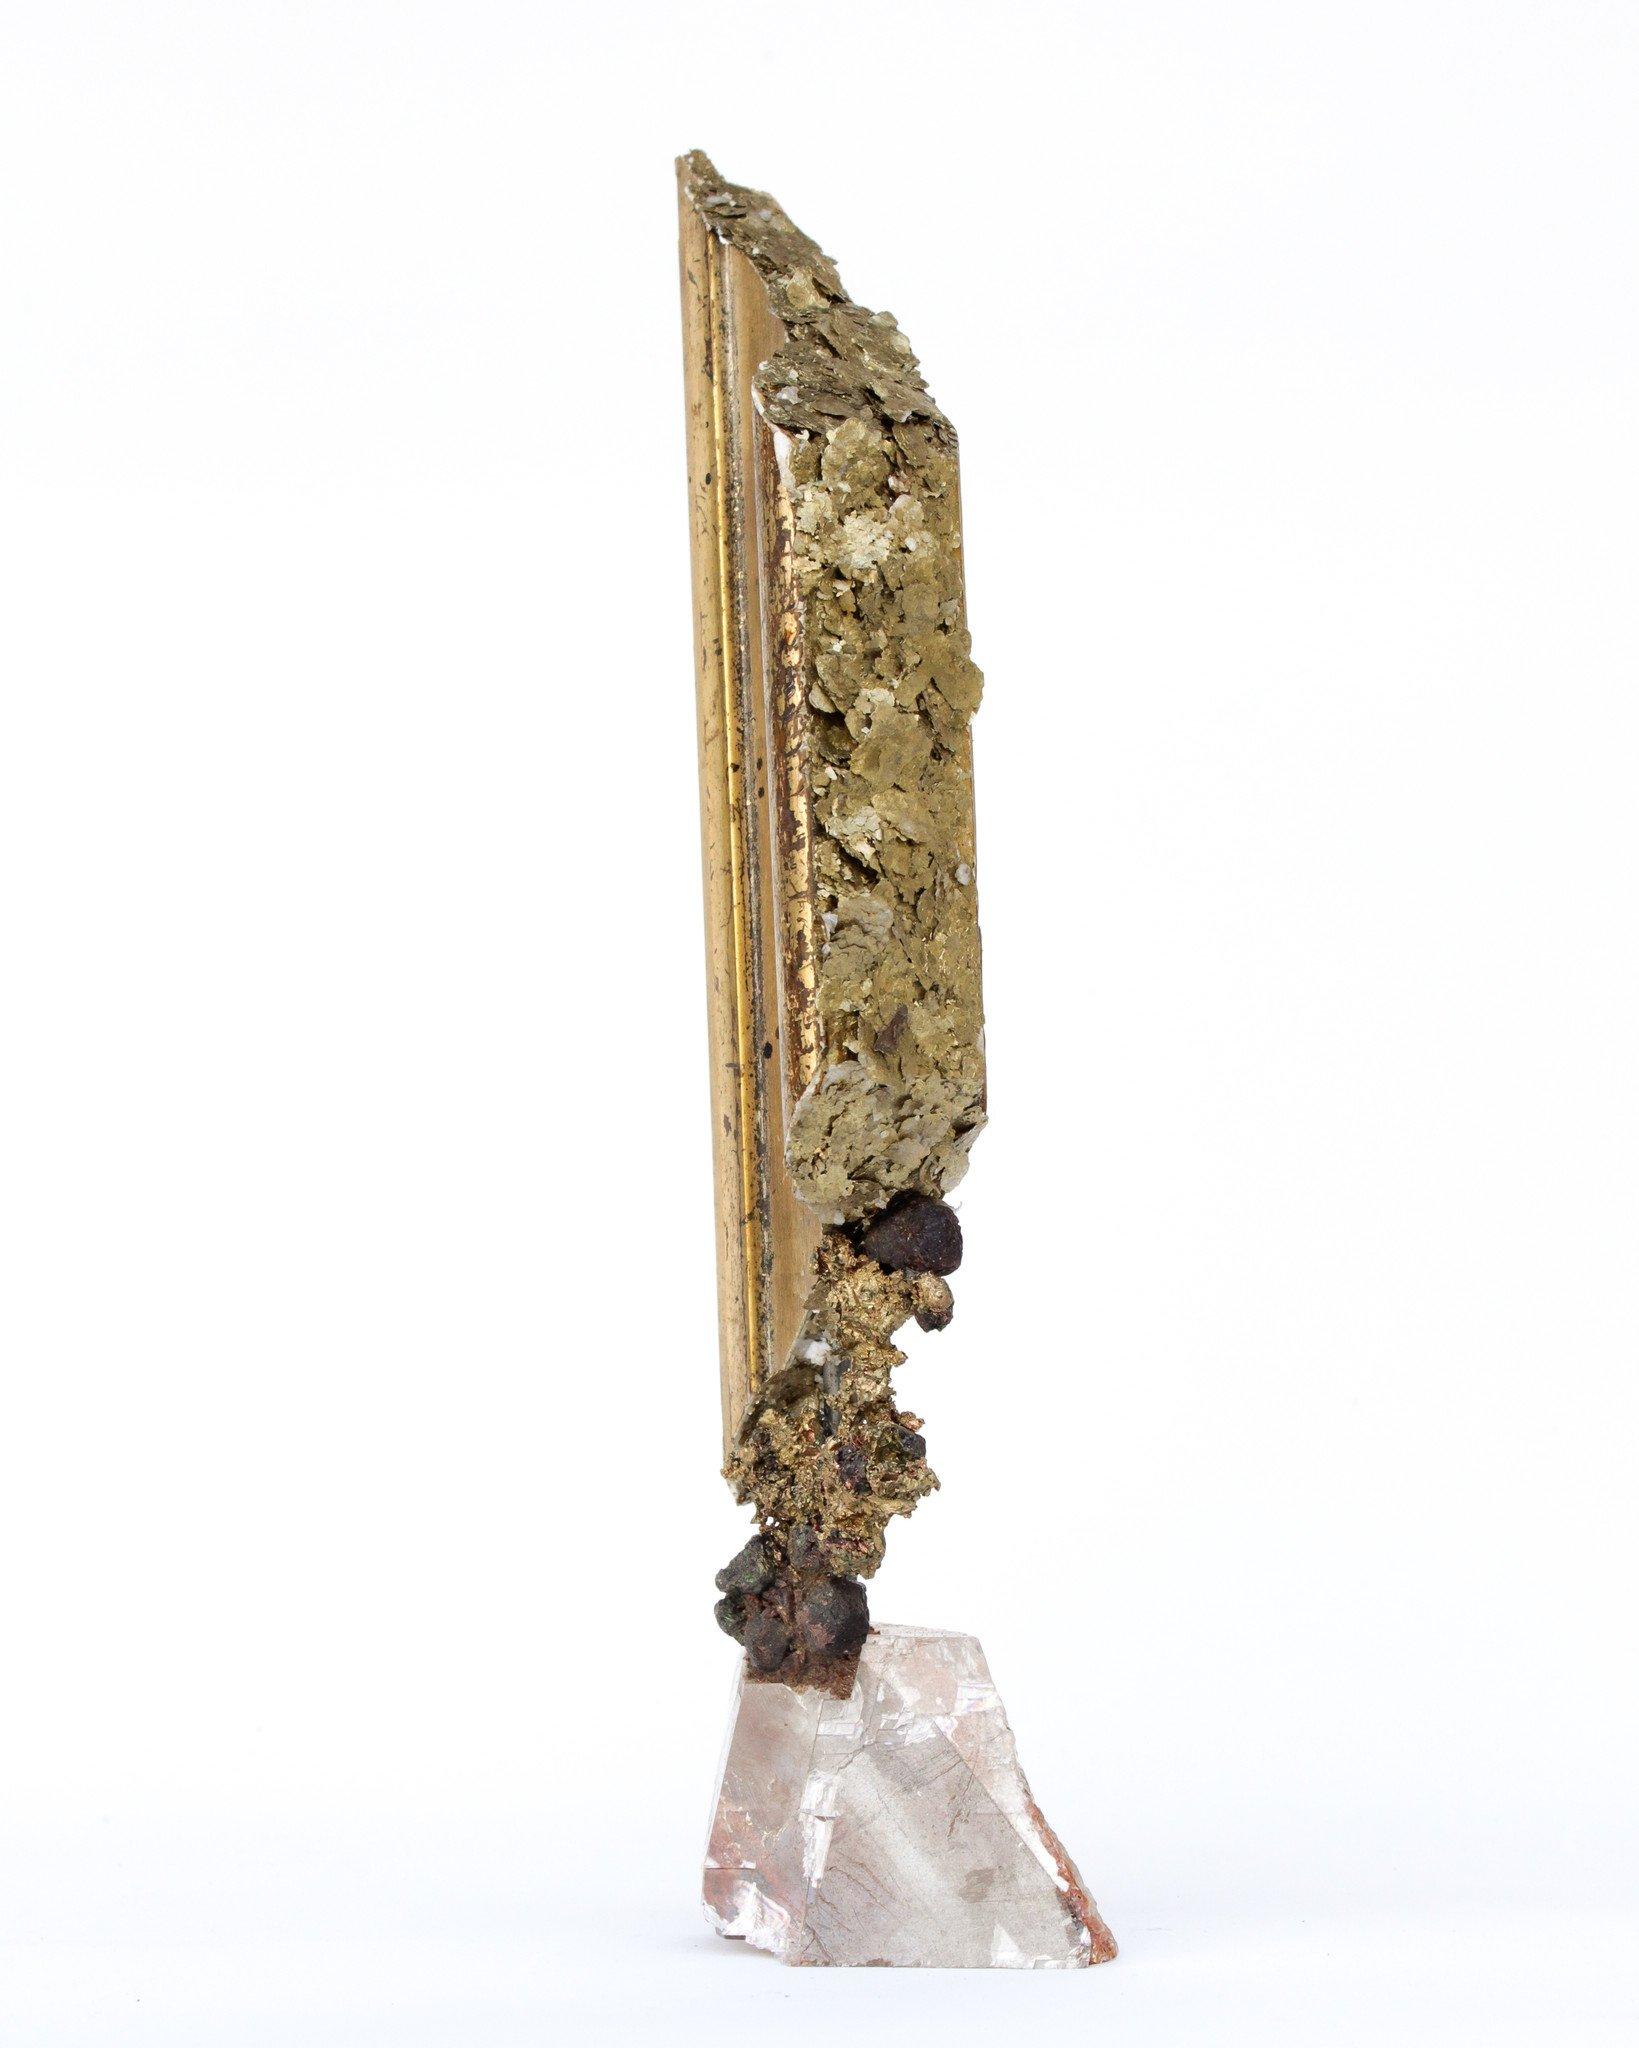 18th century Italian fragment decorated with natural forming copper, garnets, and gold mica on an optical calcite base.

The Italian fragment originally came from a piece in a church in Tuscany. It is then mounted onto the optical calcite base